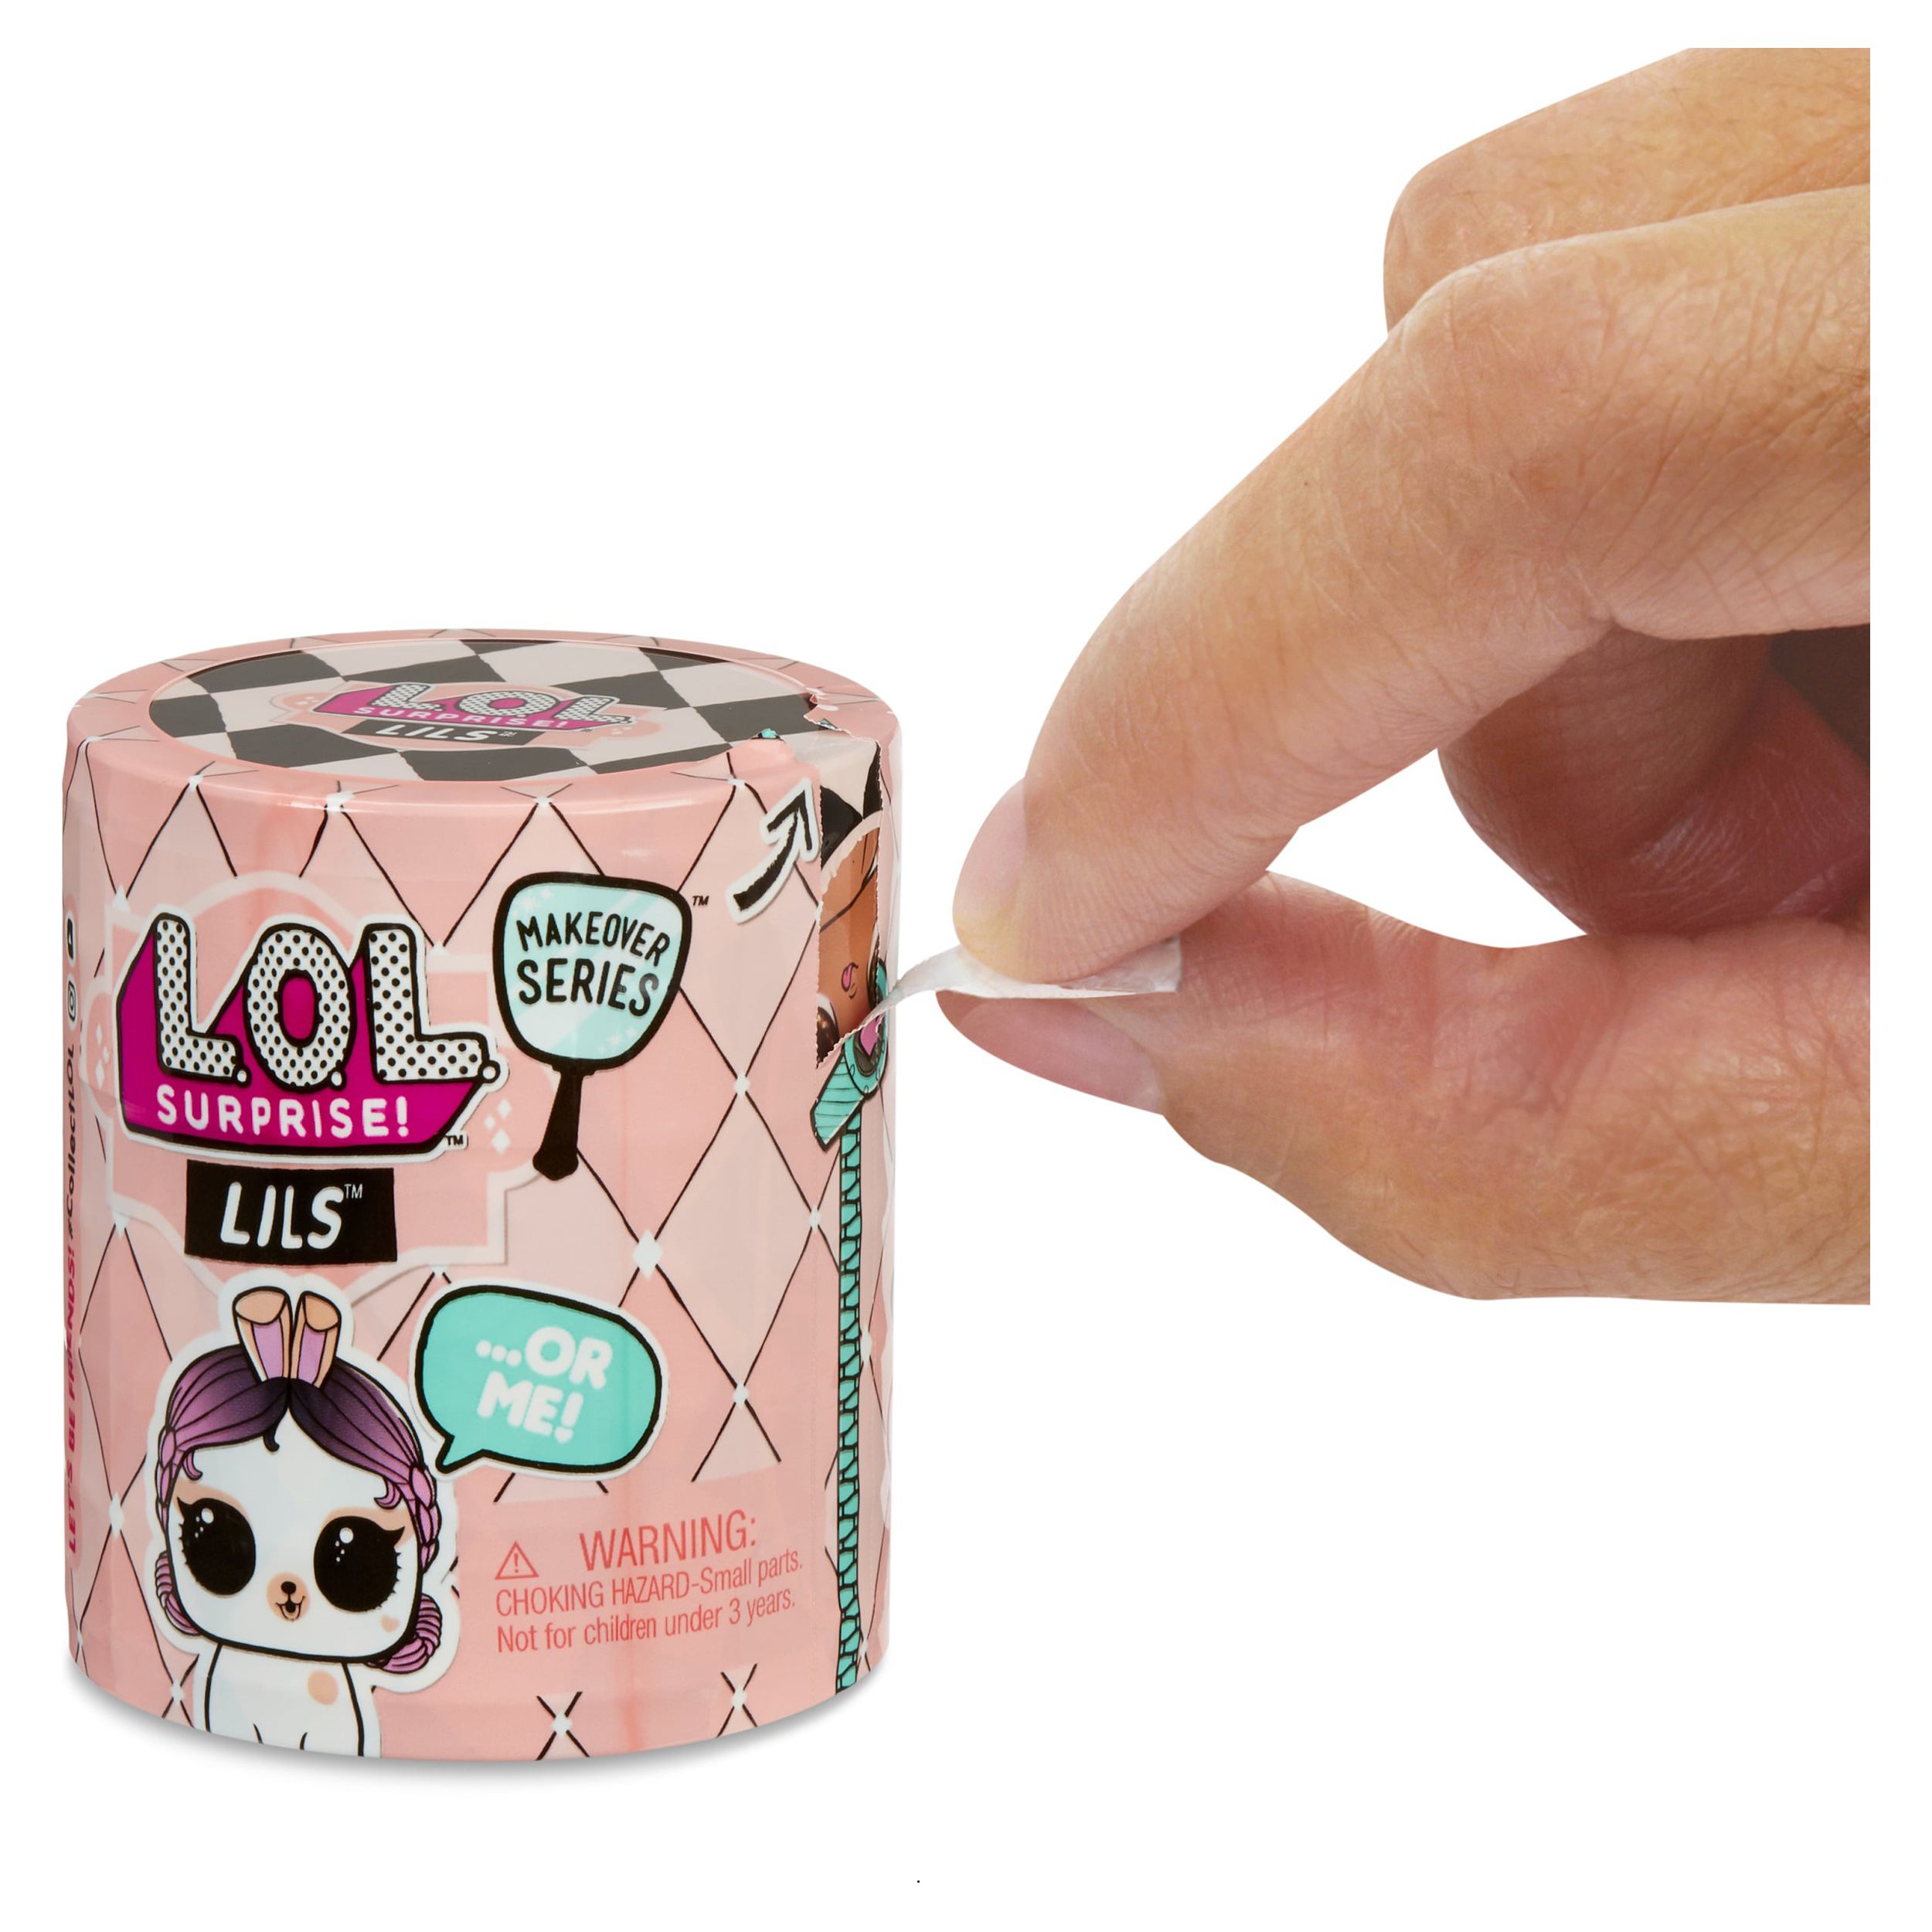 LOL Surprise Lils With Lil Pets, Sisters or Brothers, Great Gift for Kids Ages 4 5 6+ - image 3 of 6